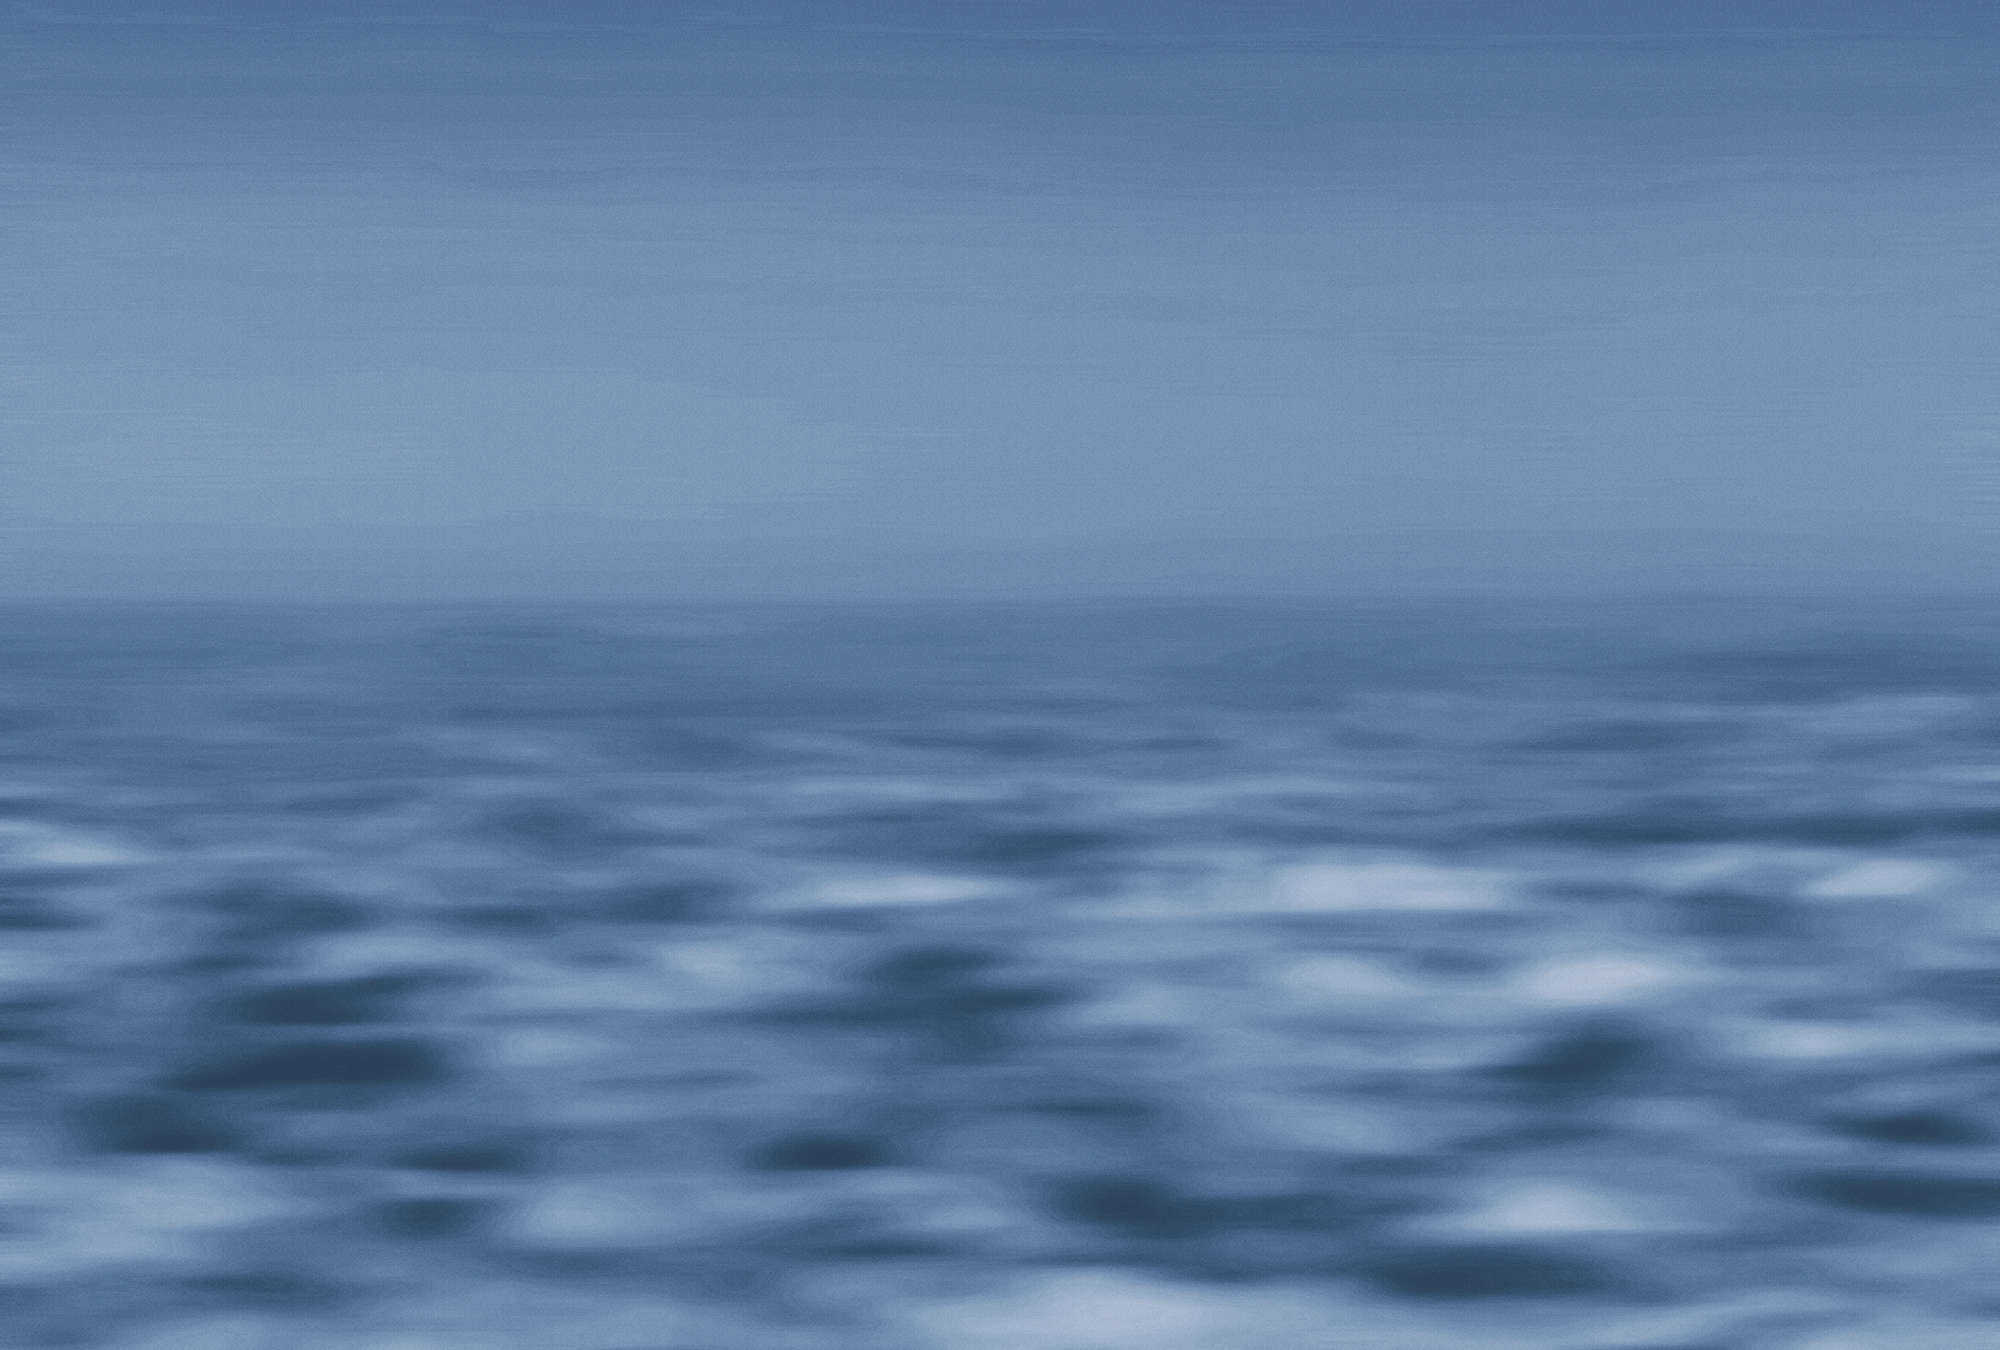             Maritime mural sea, abstract water world - blue, white
        